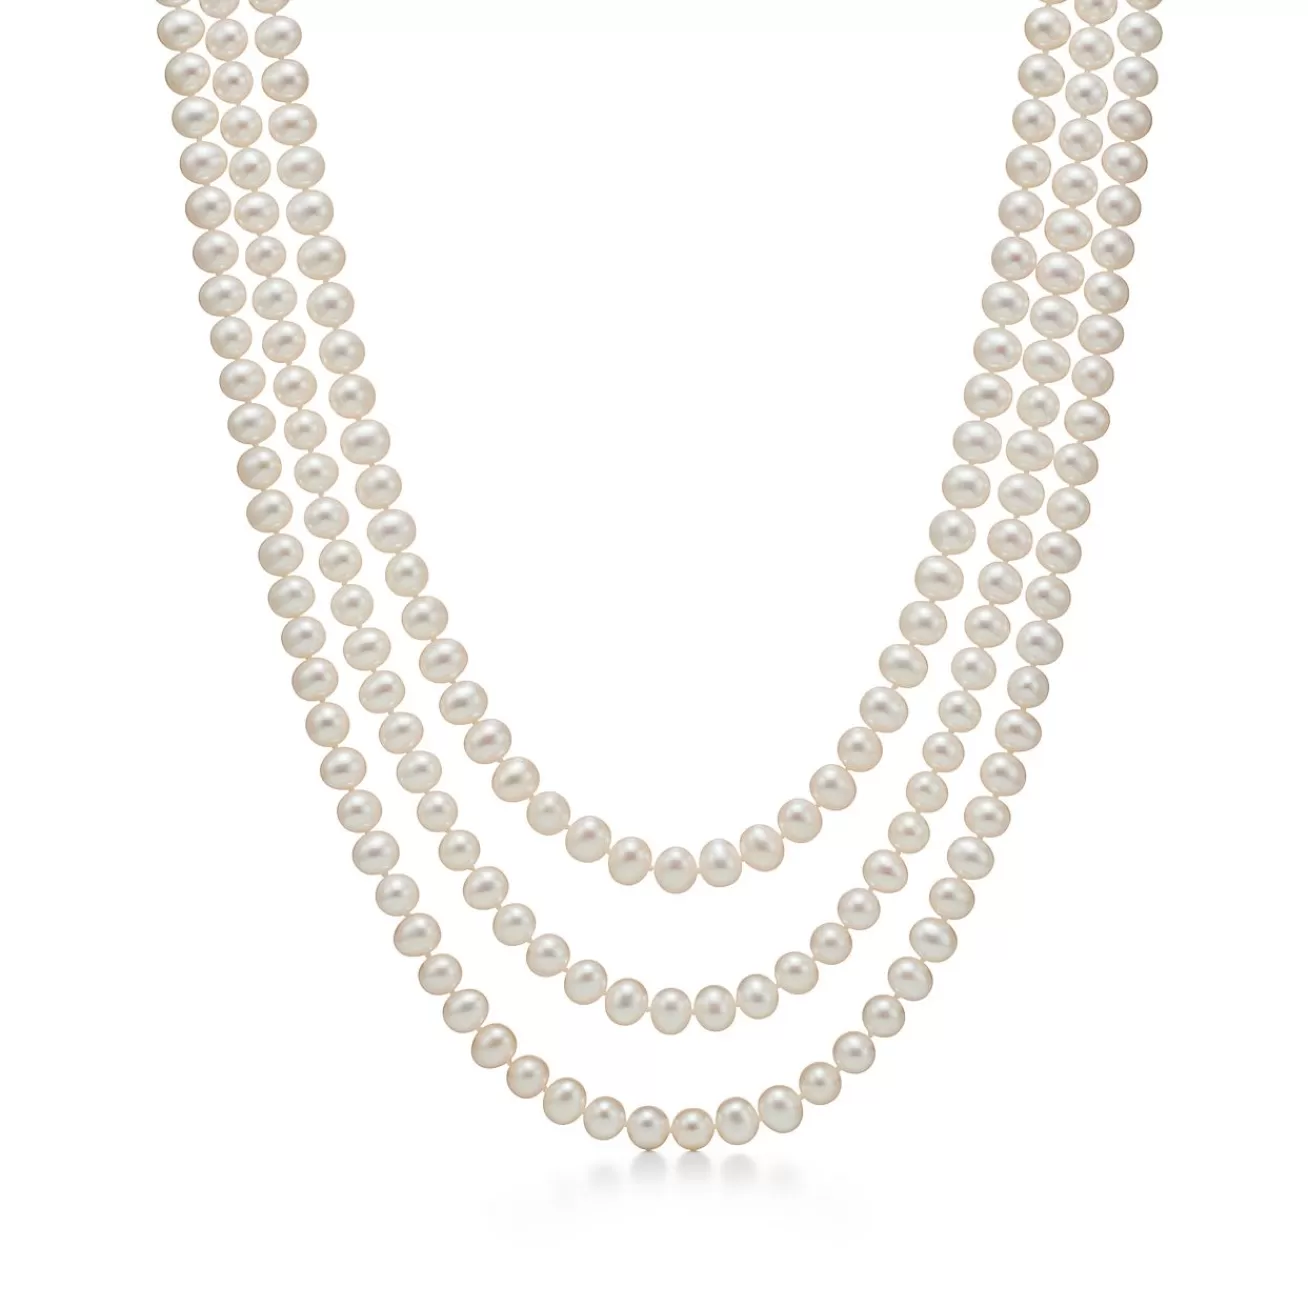 Tiffany & Co. Ziegfeld Collection Pearl Wrap Necklace with Silver Clasp, 6-7 mm | ^ Necklaces & Pendants | Sterling Silver Jewelry